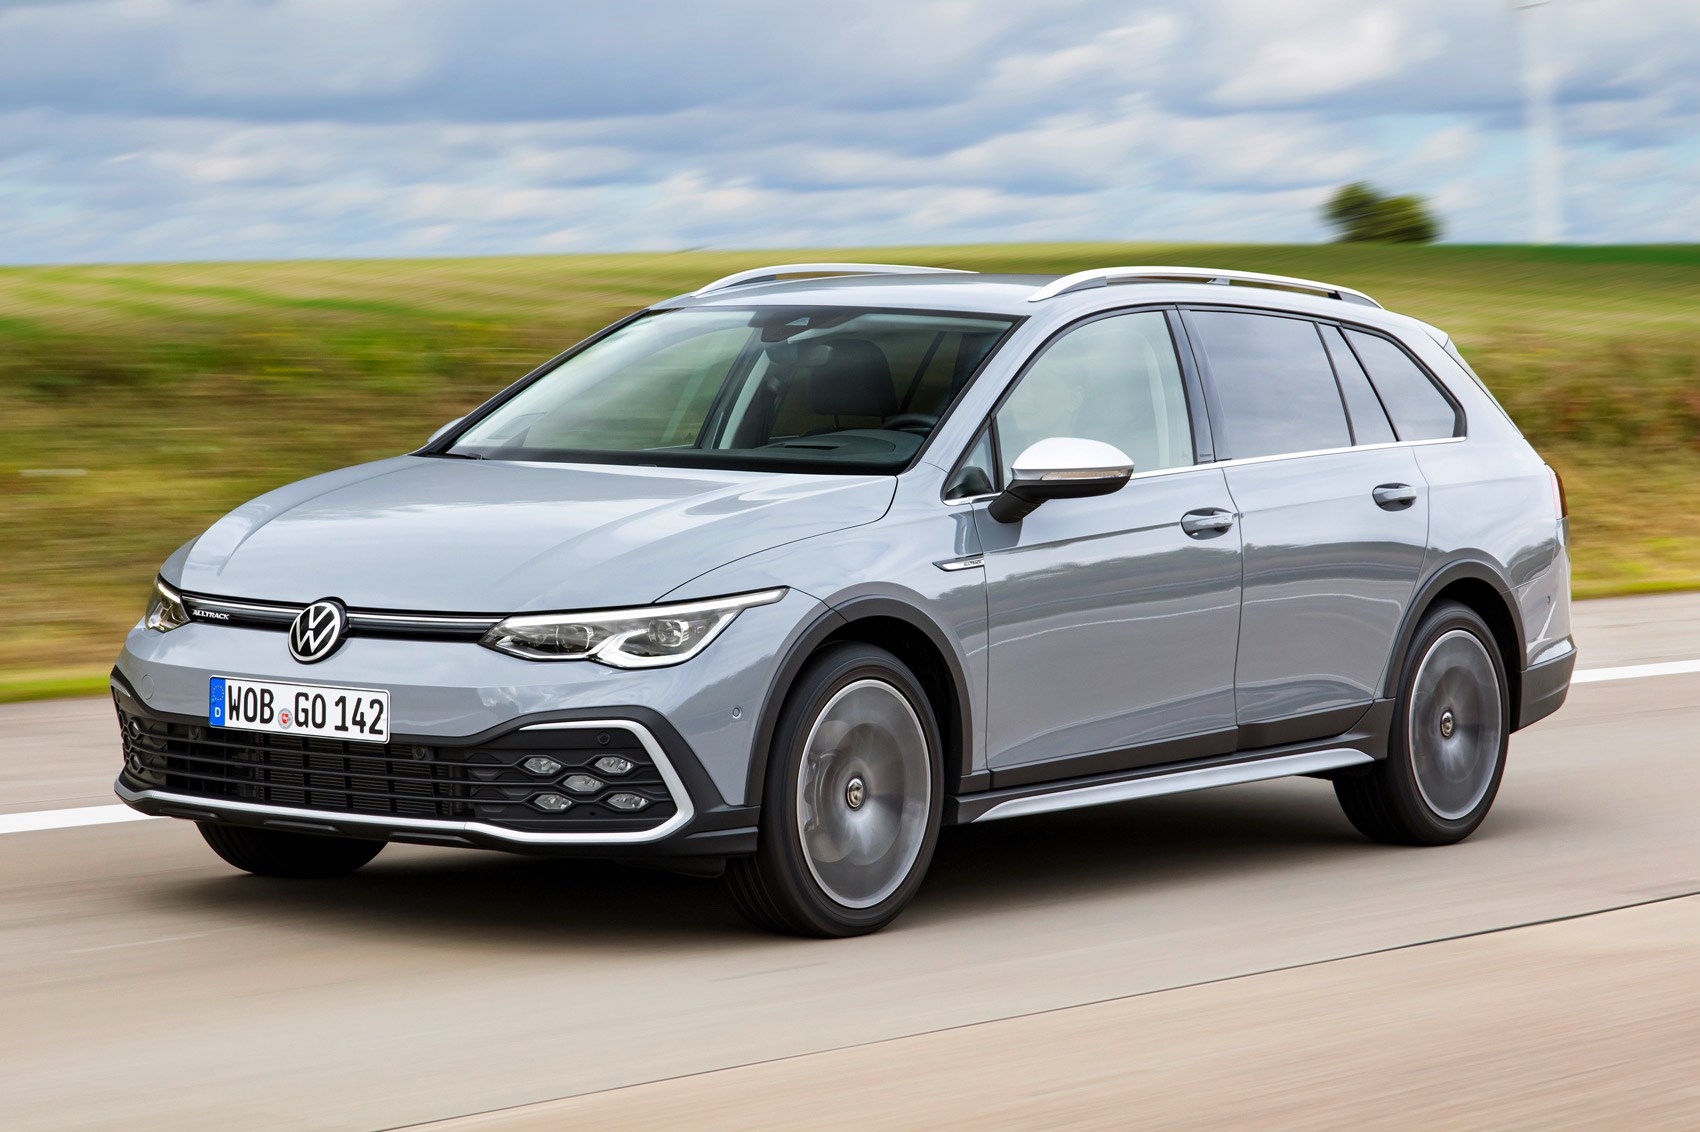 VW Golf Alltrack estate (2021) review: the obscure option